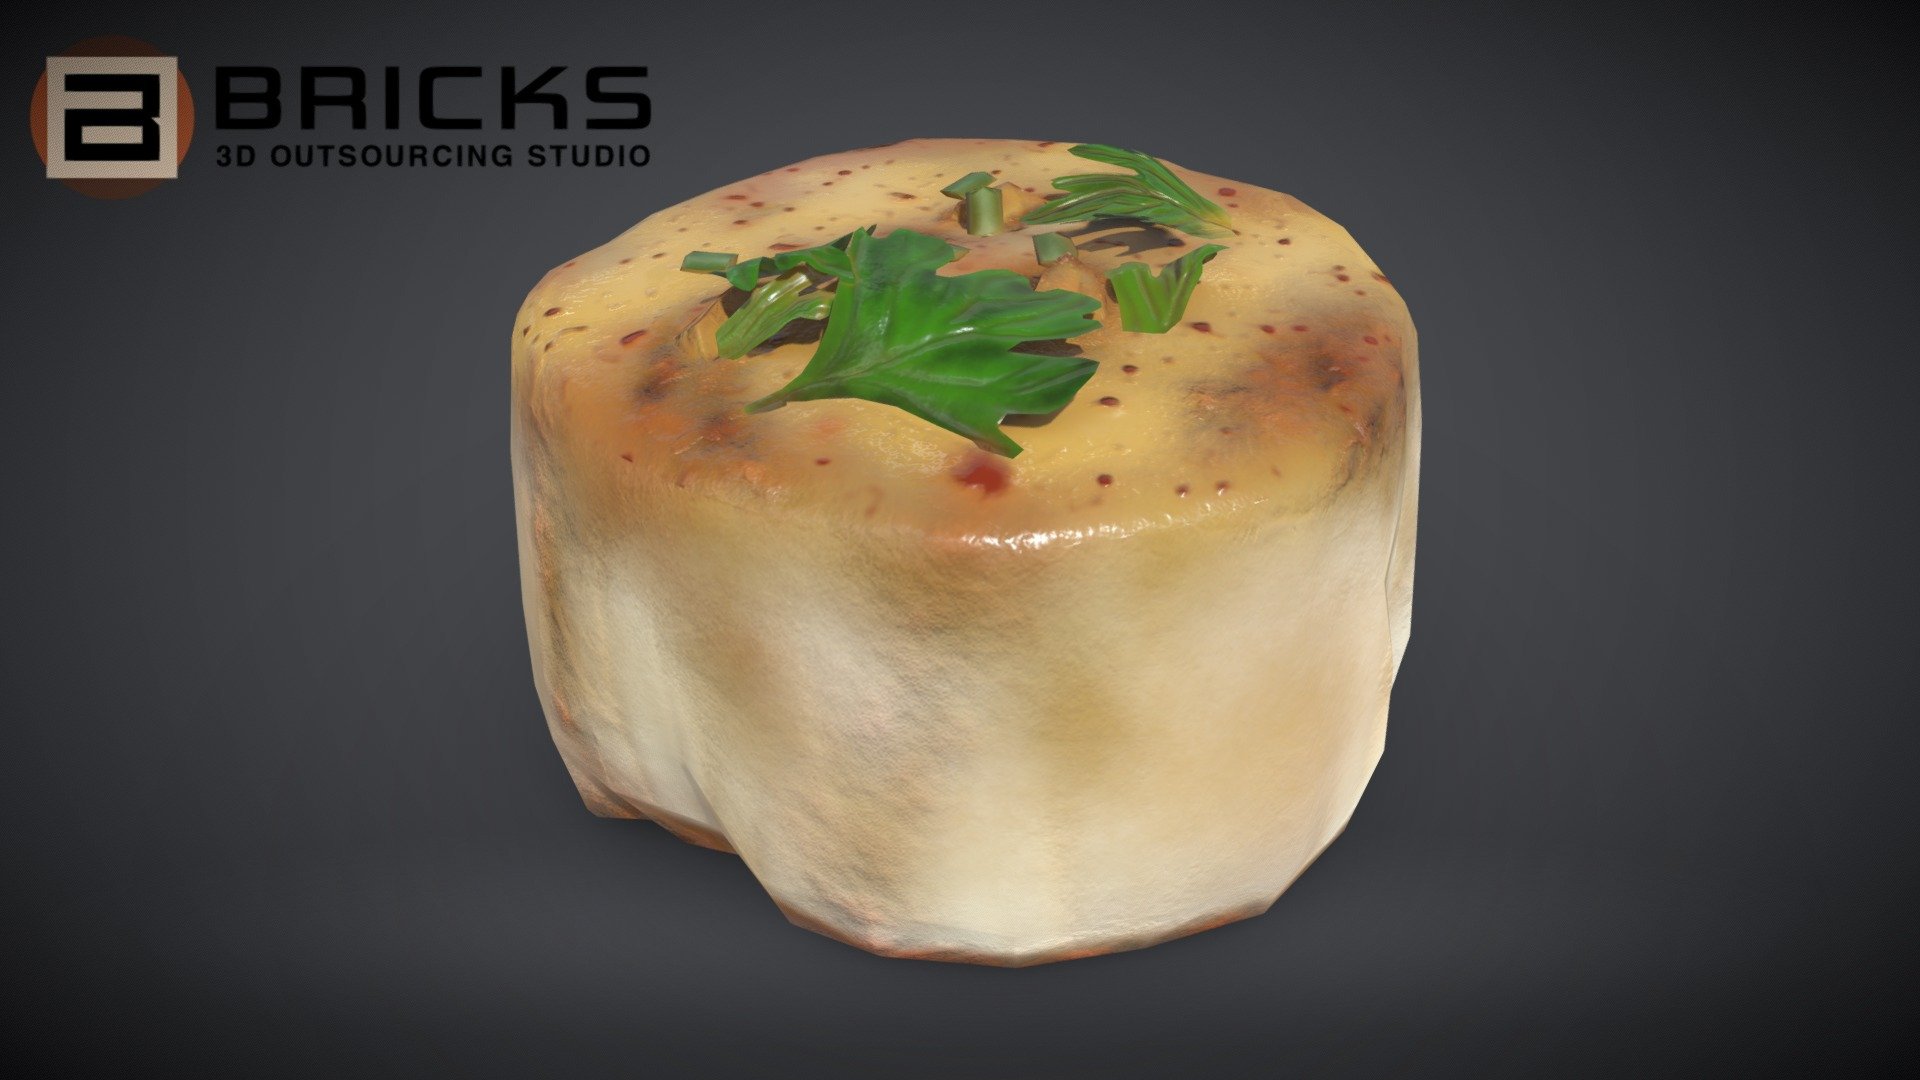 PBR Food Asset:
ScallopGarlic
Polycount: 1175
Vertex count: 759
Texture Size: 1024px x 1024px
Normal: OpenGL

If you need any adjust in file please contact us: team@bricks3dstudio.com

Hire us: tringuyen@bricks3dstudio.com
Here is us: https://www.bricks3dstudio.com/
        https://www.artstation.com/bricksstudio
        https://www.facebook.com/Bricks3dstudio/
        https://www.linkedin.com/in/bricks-studio-b10462252/ - ScallopGarlic - Buy Royalty Free 3D model by Bricks Studio (@bricks3dstudio) 3d model